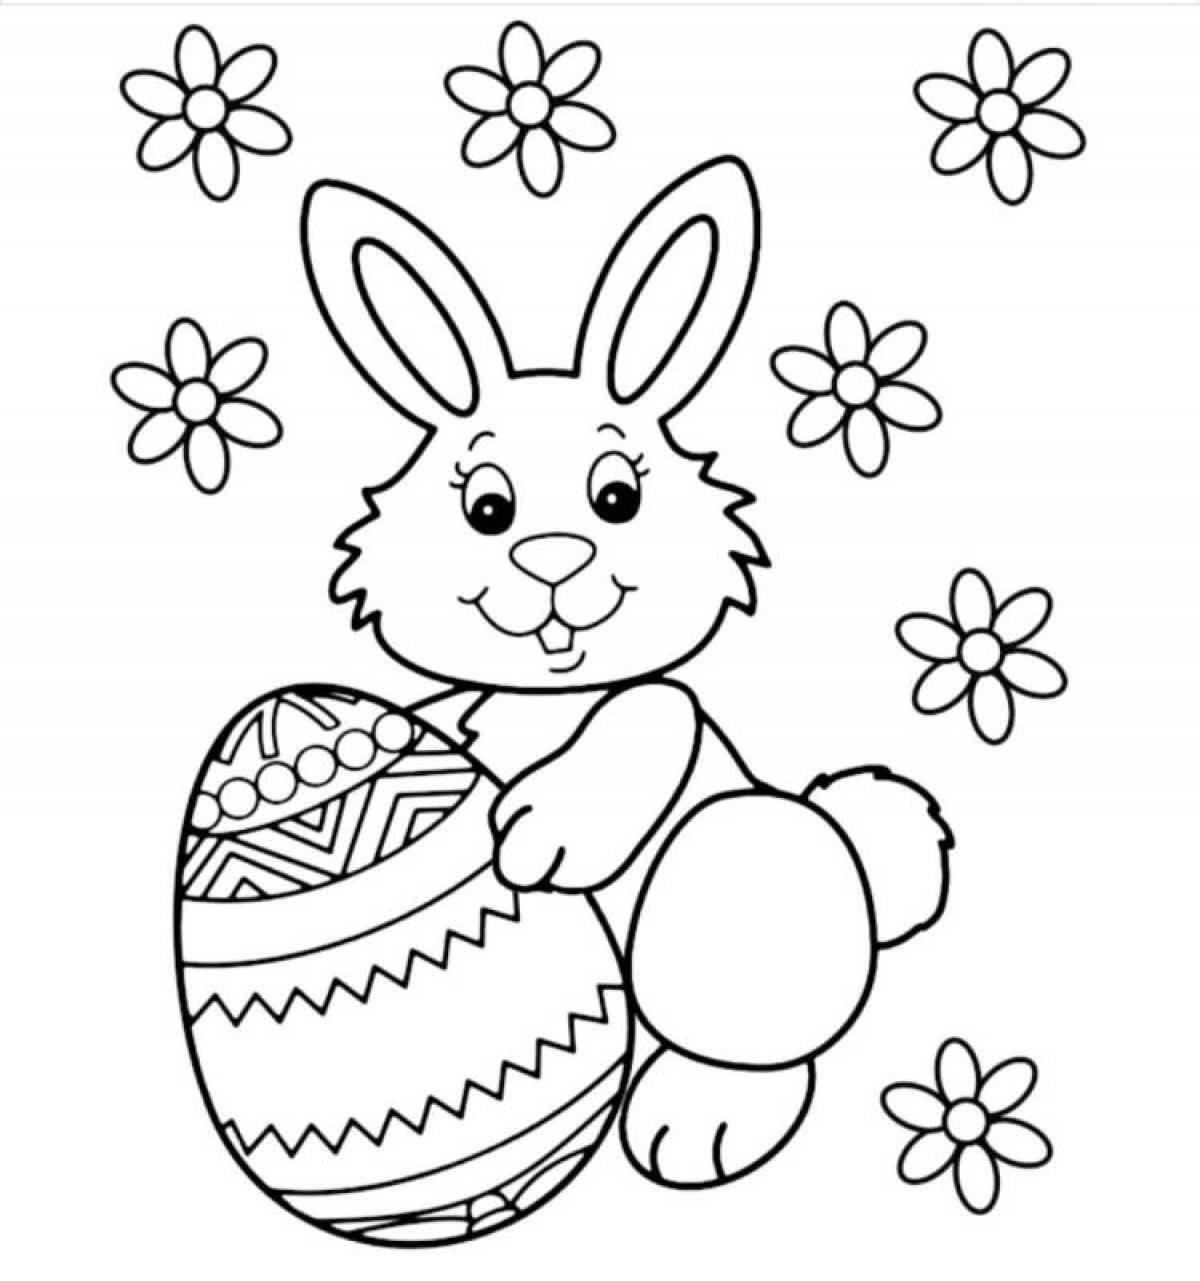 Coloring page festive easter